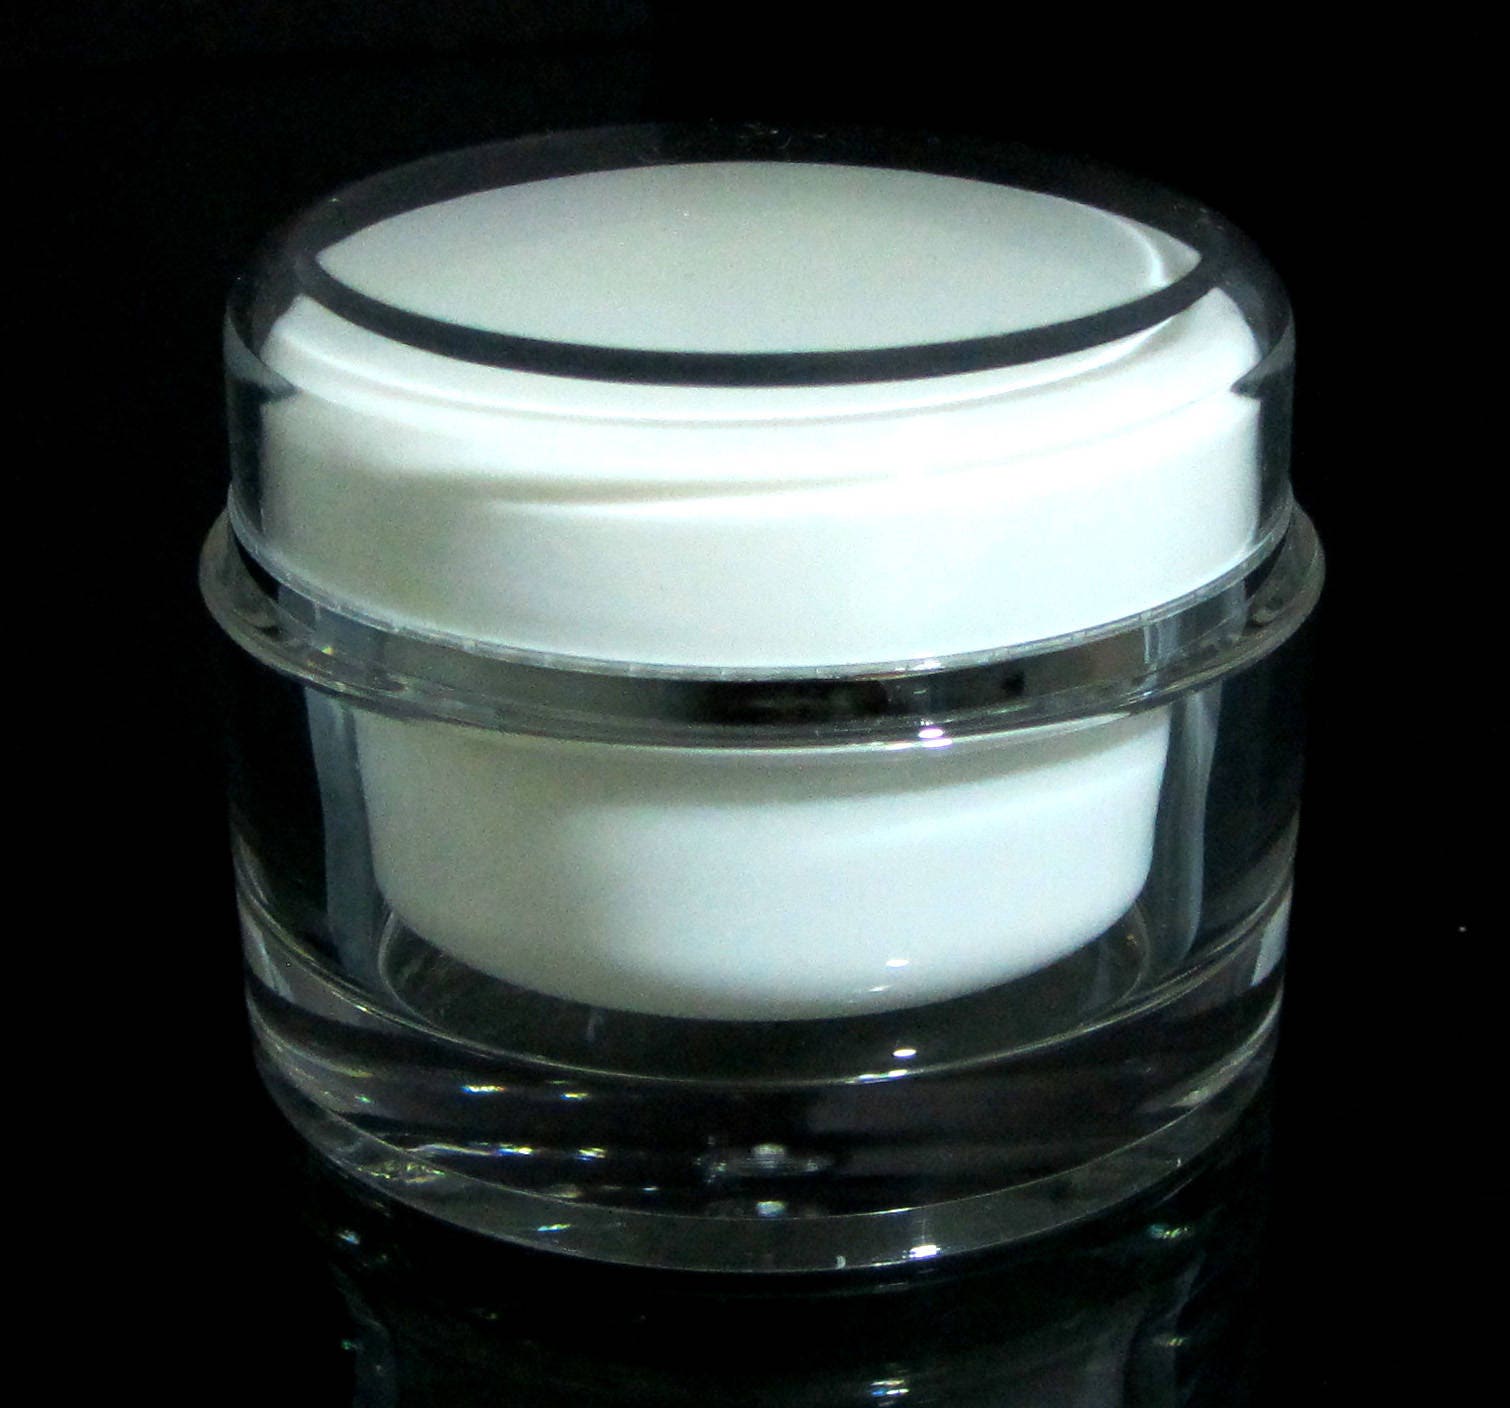 25 Acrylic Cosmetic Cream Jar Elegant Beauty Empty Containers w/ Sealing Disc 50 ML (3150-25) Discount Cosmetic Jars